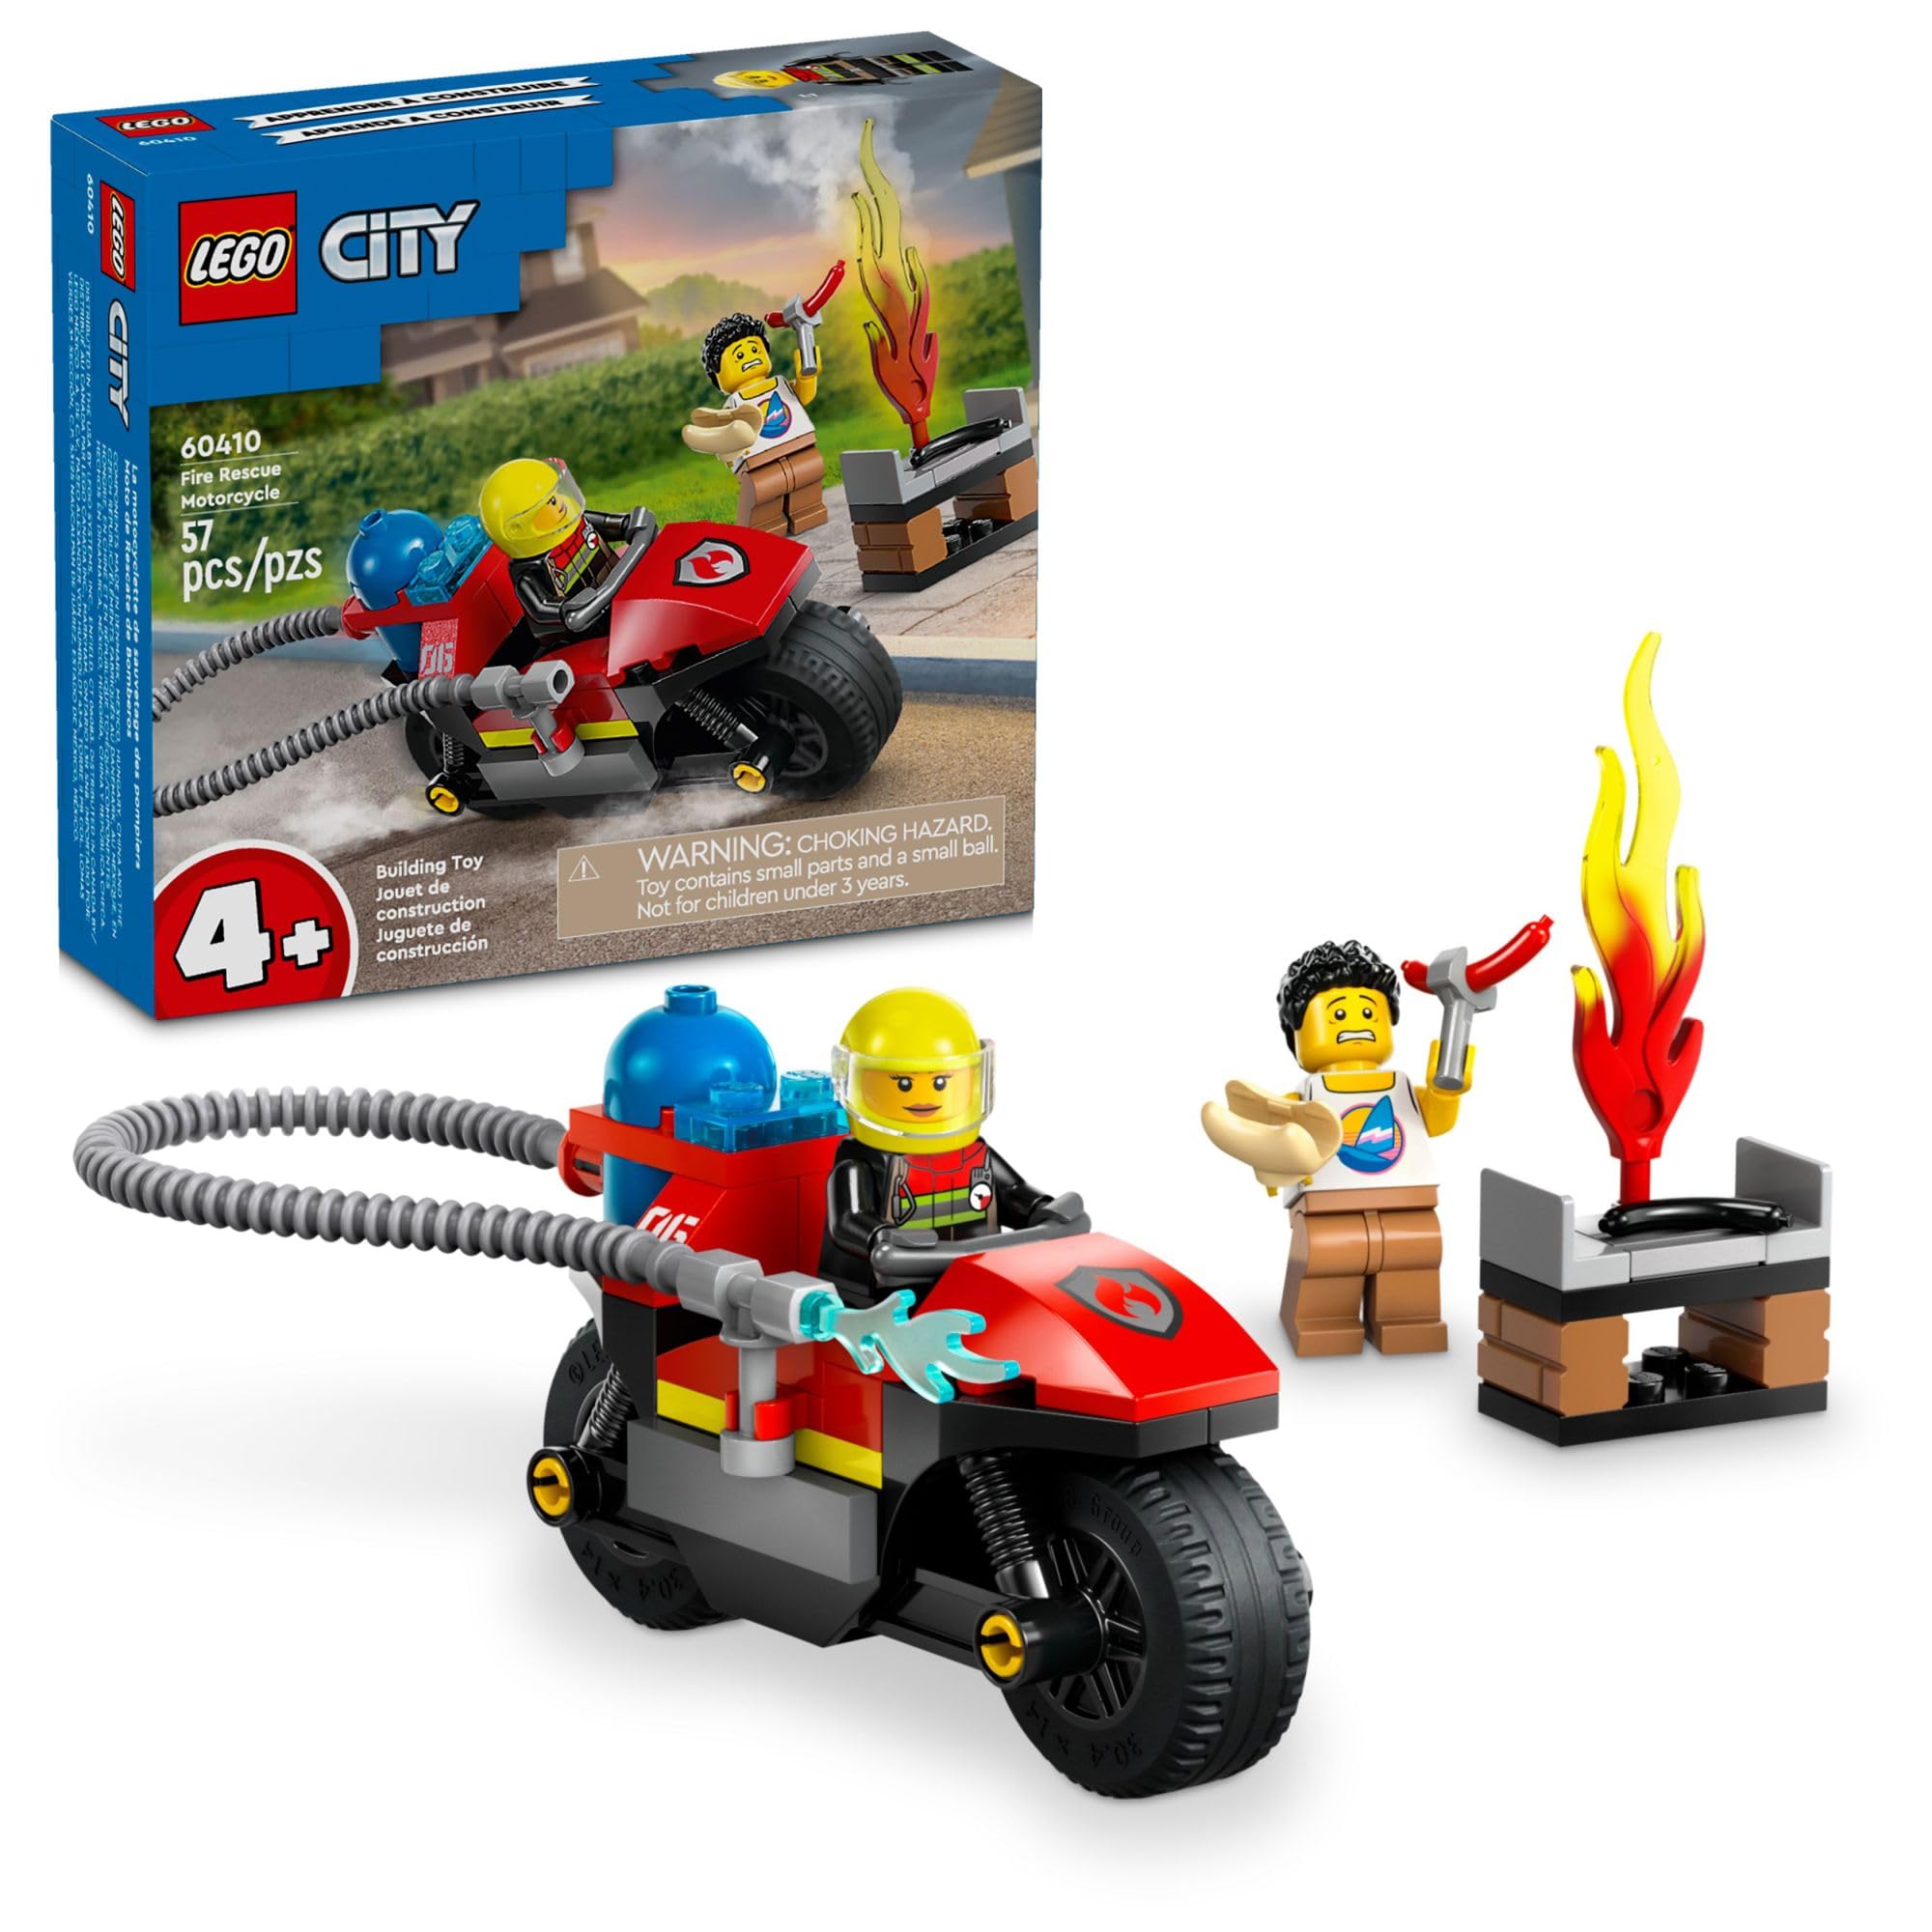 LEGO City Fire Rescue Motorcycle Firefighter Toy Playset for Kids Ages 4 and Up, Includes a Motorcycle Toy and 2 Minifigures, Fun Gift Idea or Pretend Play Toy for Boys and Girls, 60410